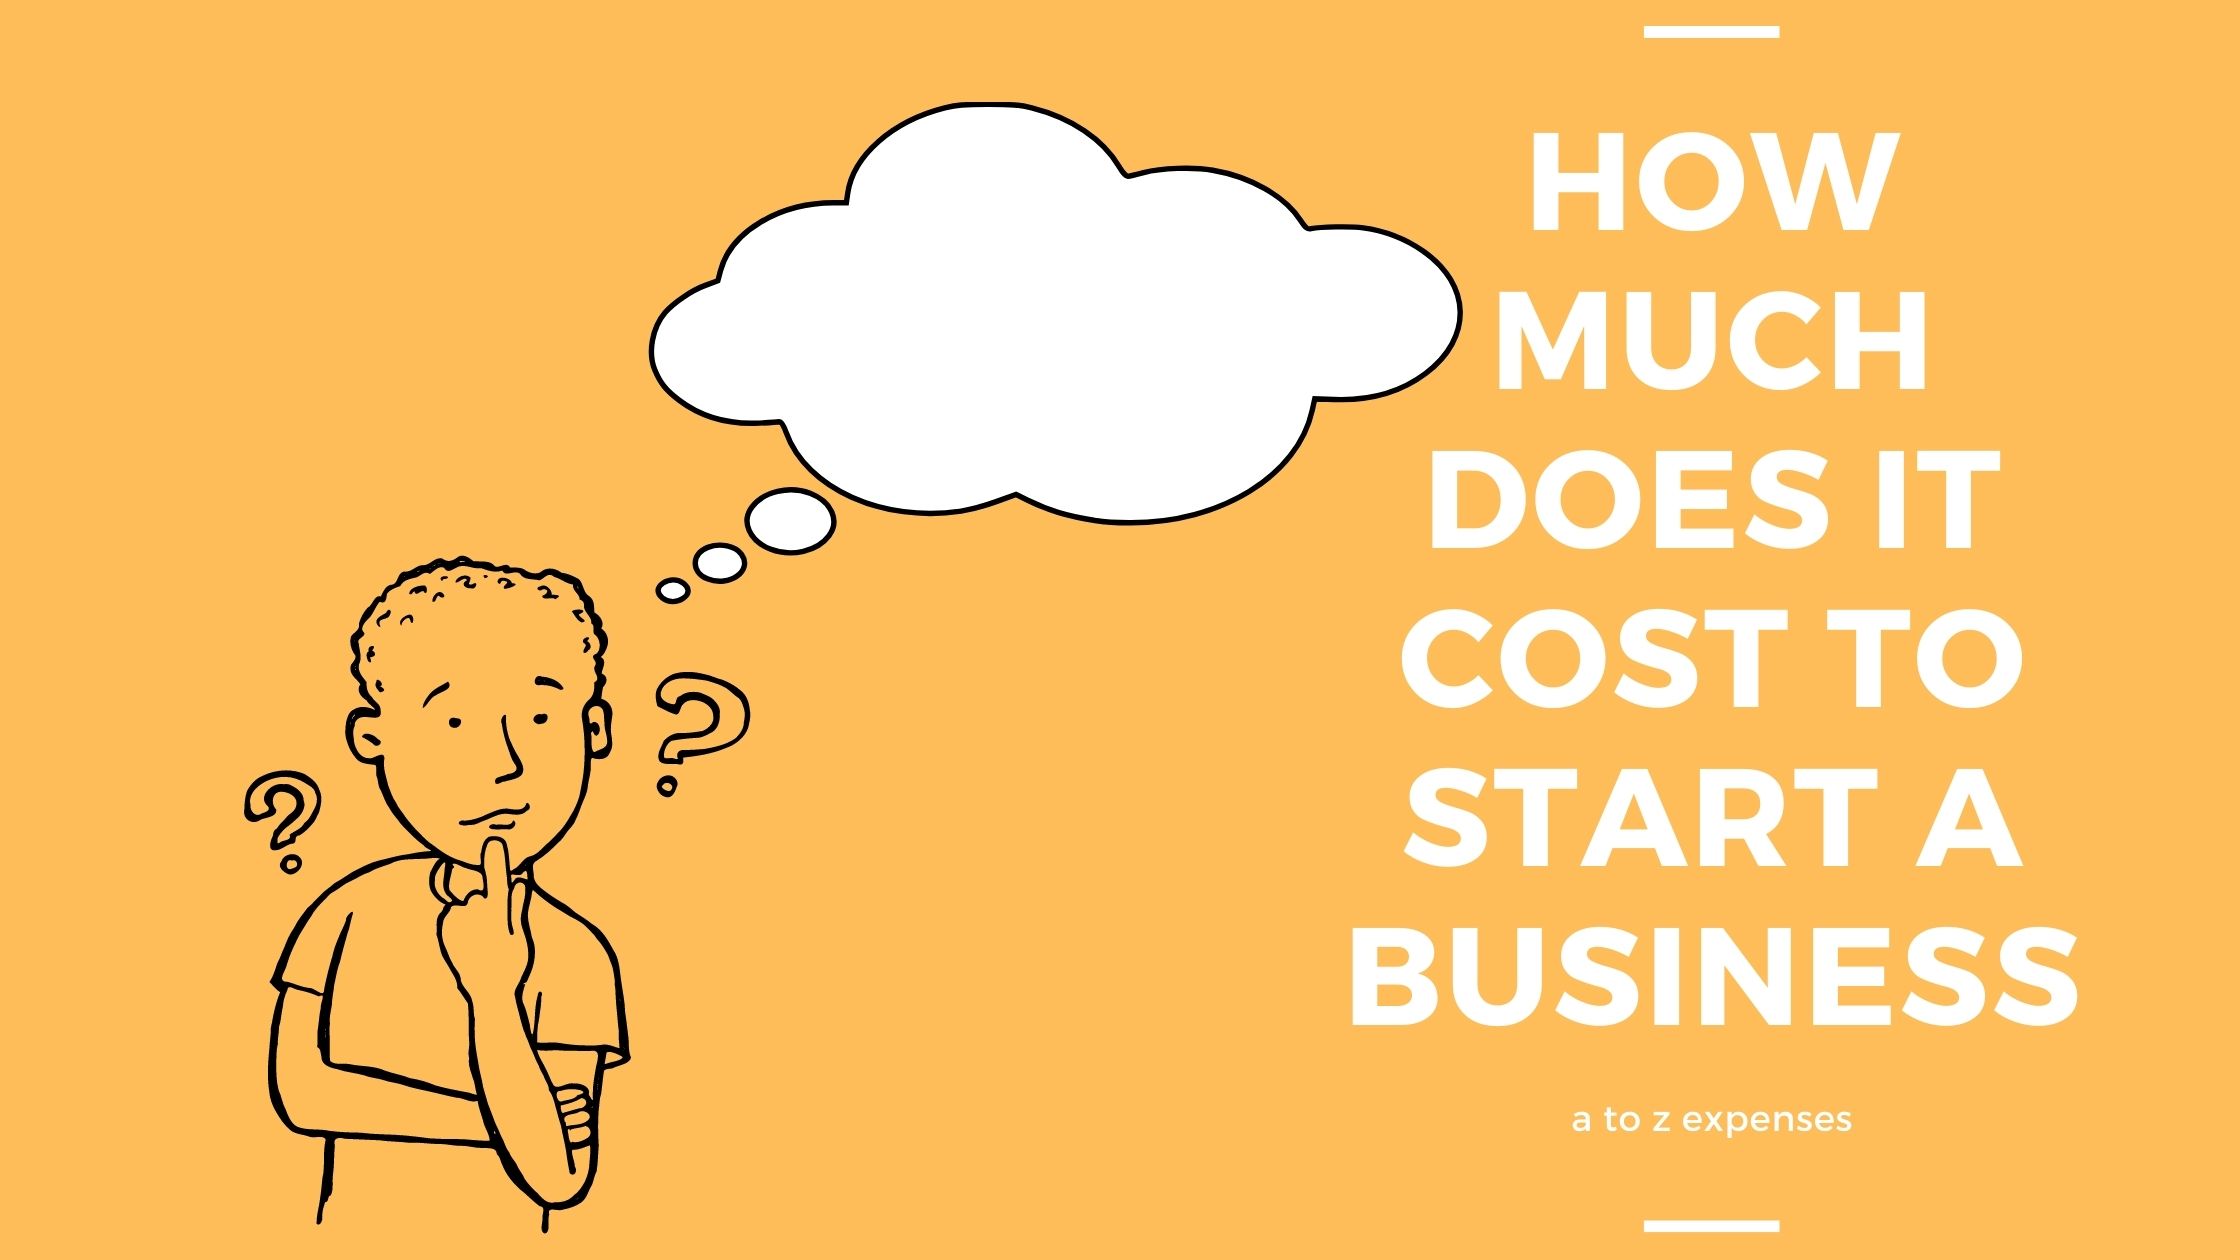 How much does it cost to start a business